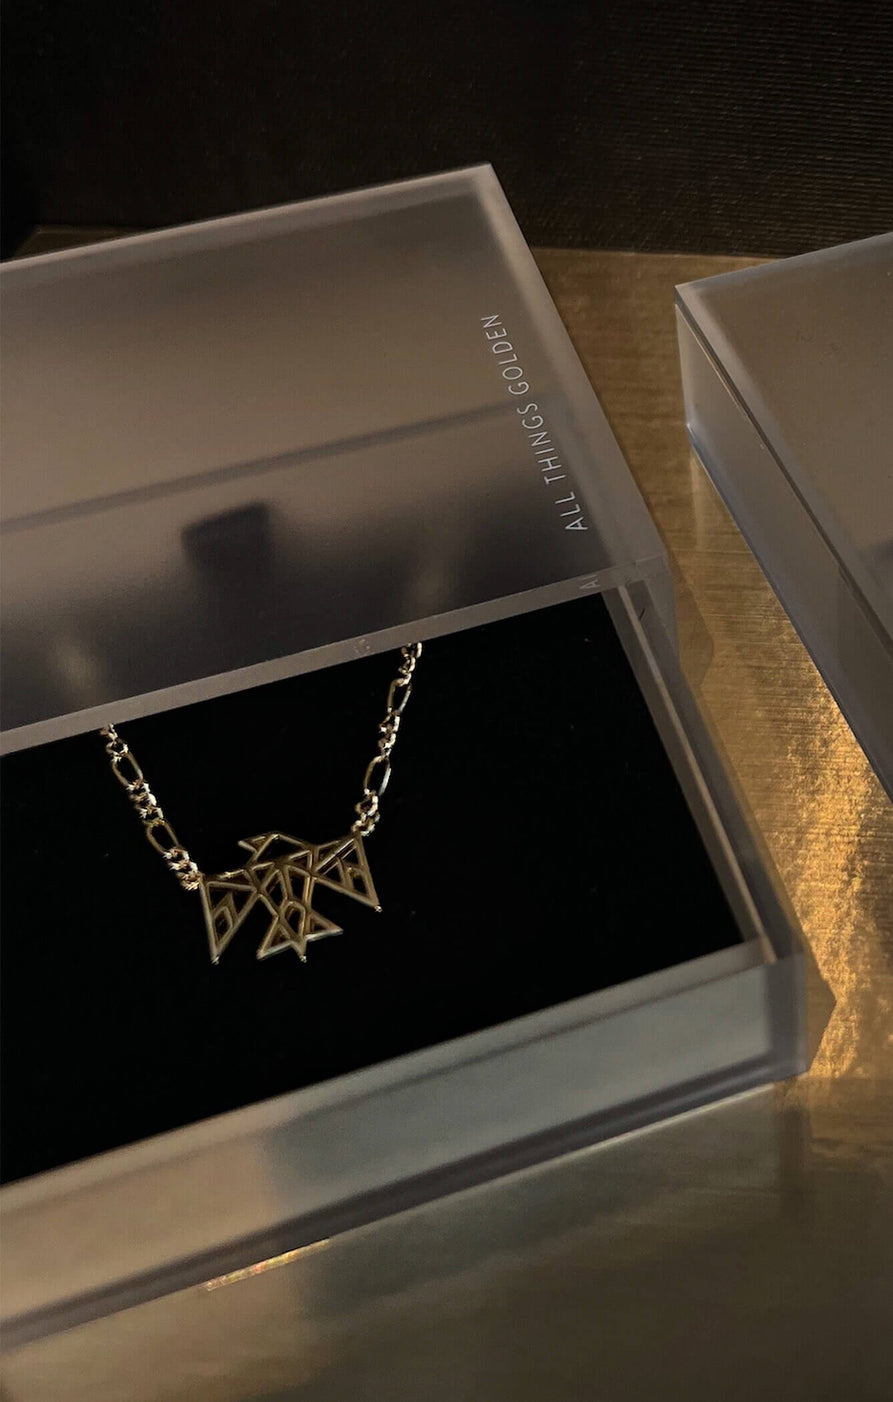 THE SIGNATURE NECKLACE - GOLD